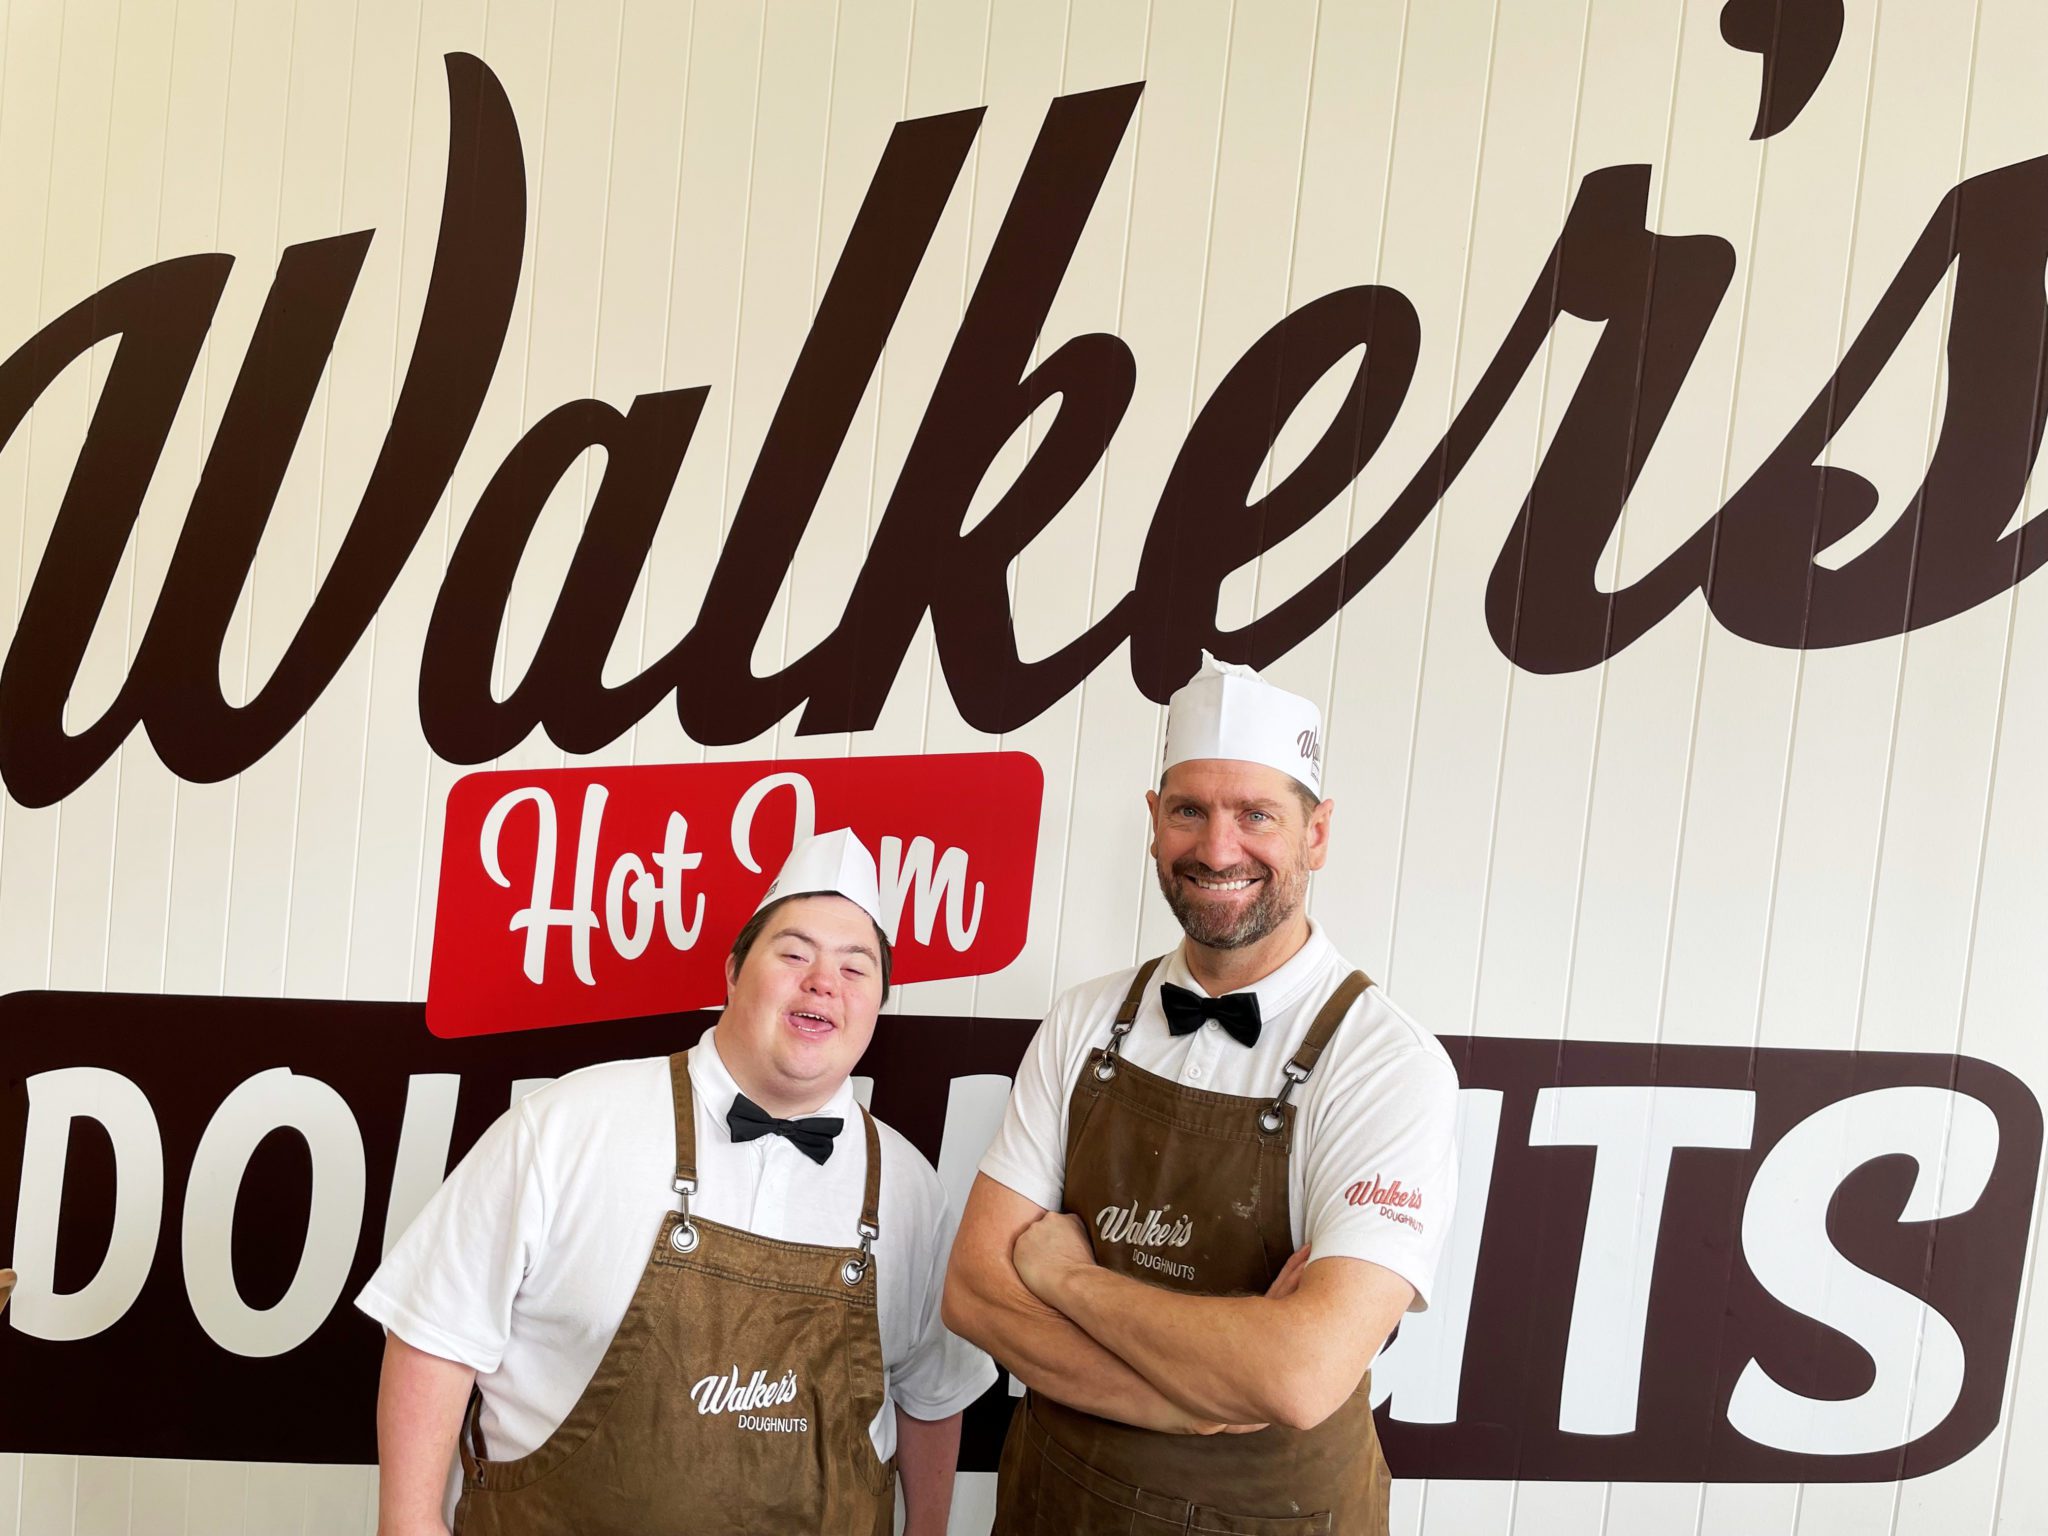 Kyle working at Walkers Doughnuts